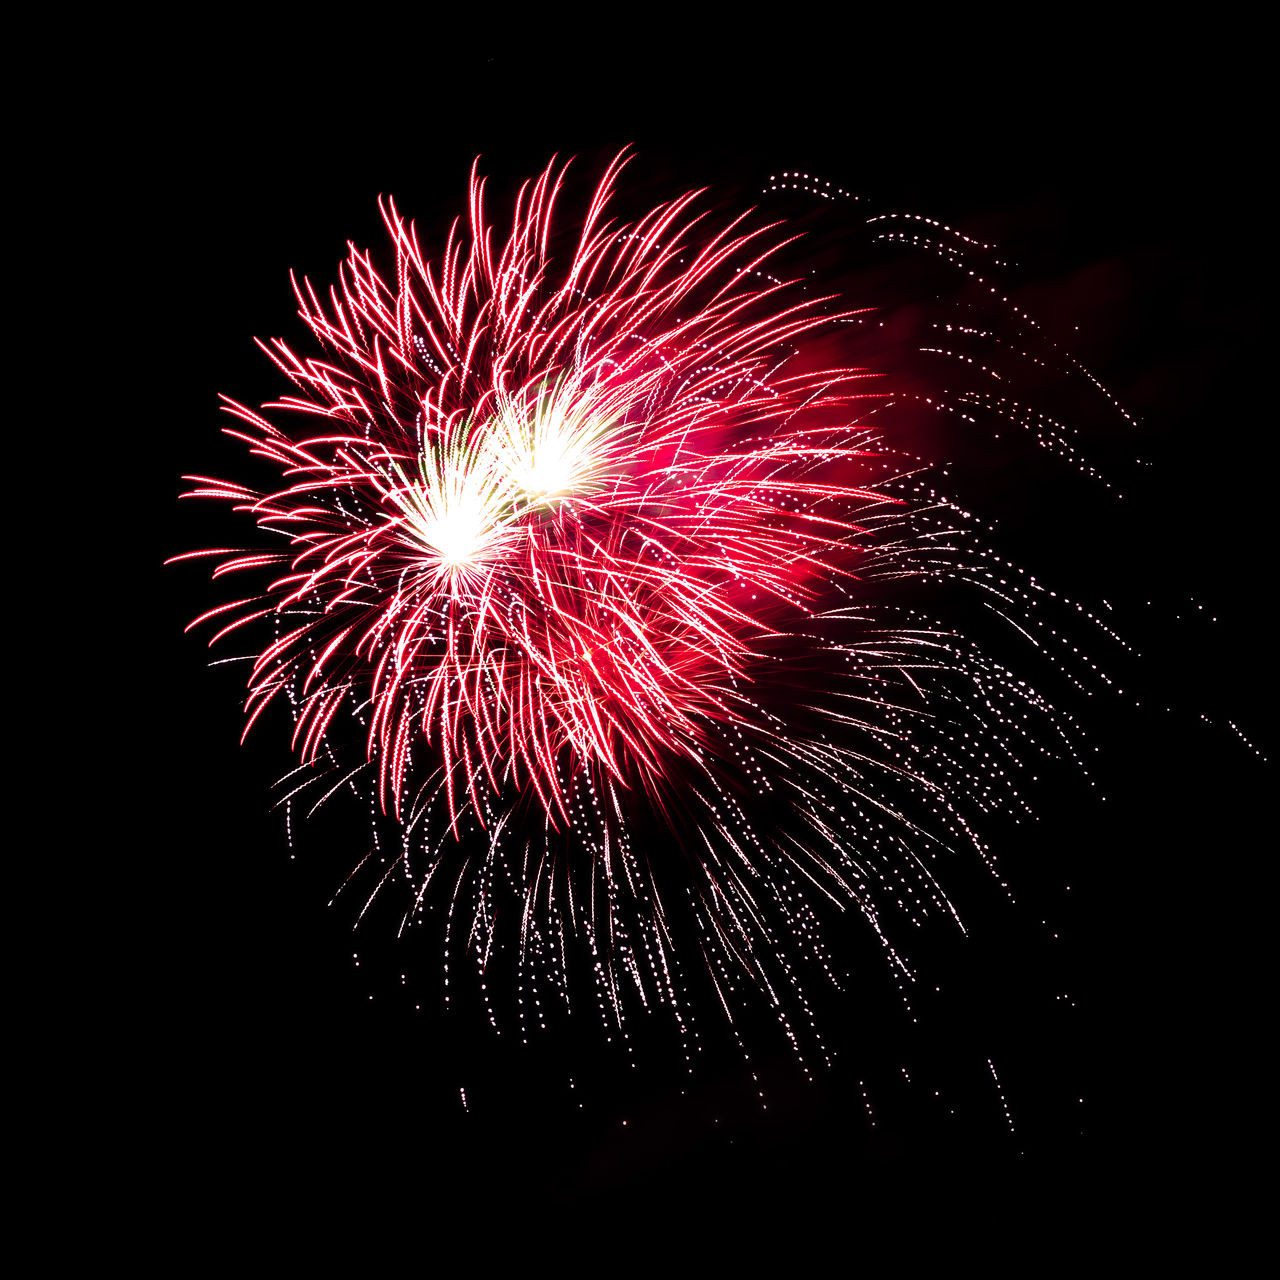 fireworks, motion, firework display, celebration, night, event, exploding, arts culture and entertainment, illuminated, glowing, recreation, no people, low angle view, sky, nature, long exposure, firework - man made object, blurred motion, multi colored, red, outdoors, dark